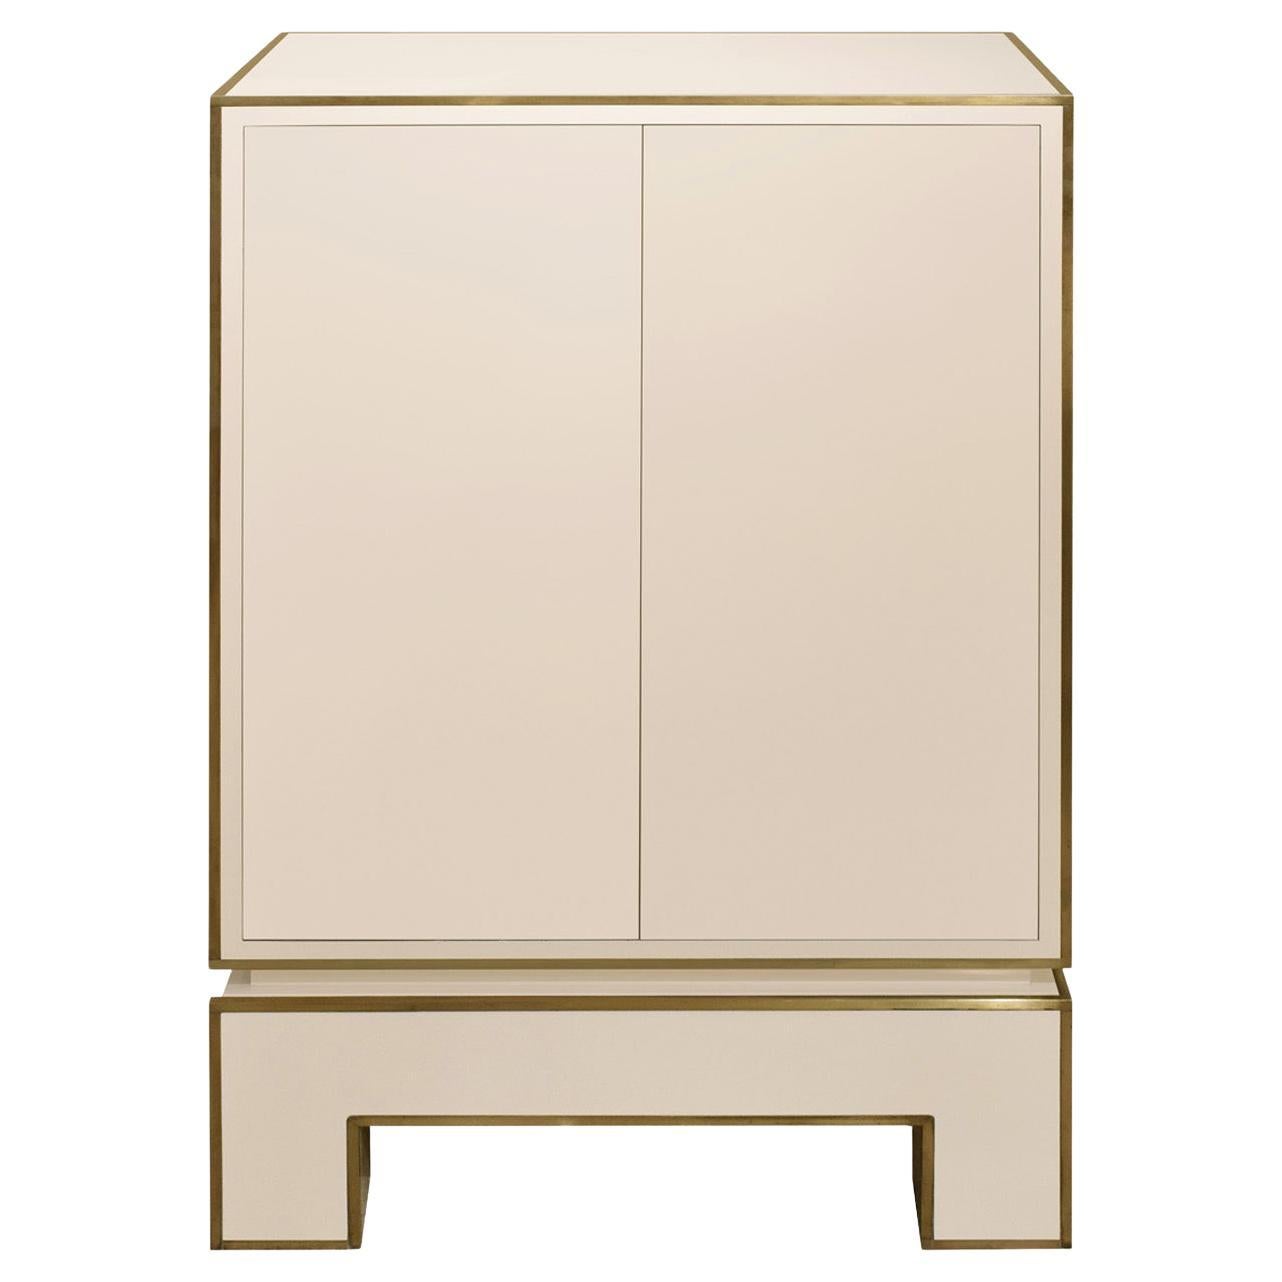 Jansen 2 Door Cabinet in Ivory Lacquer with Brass Trim 1975 'Signed'